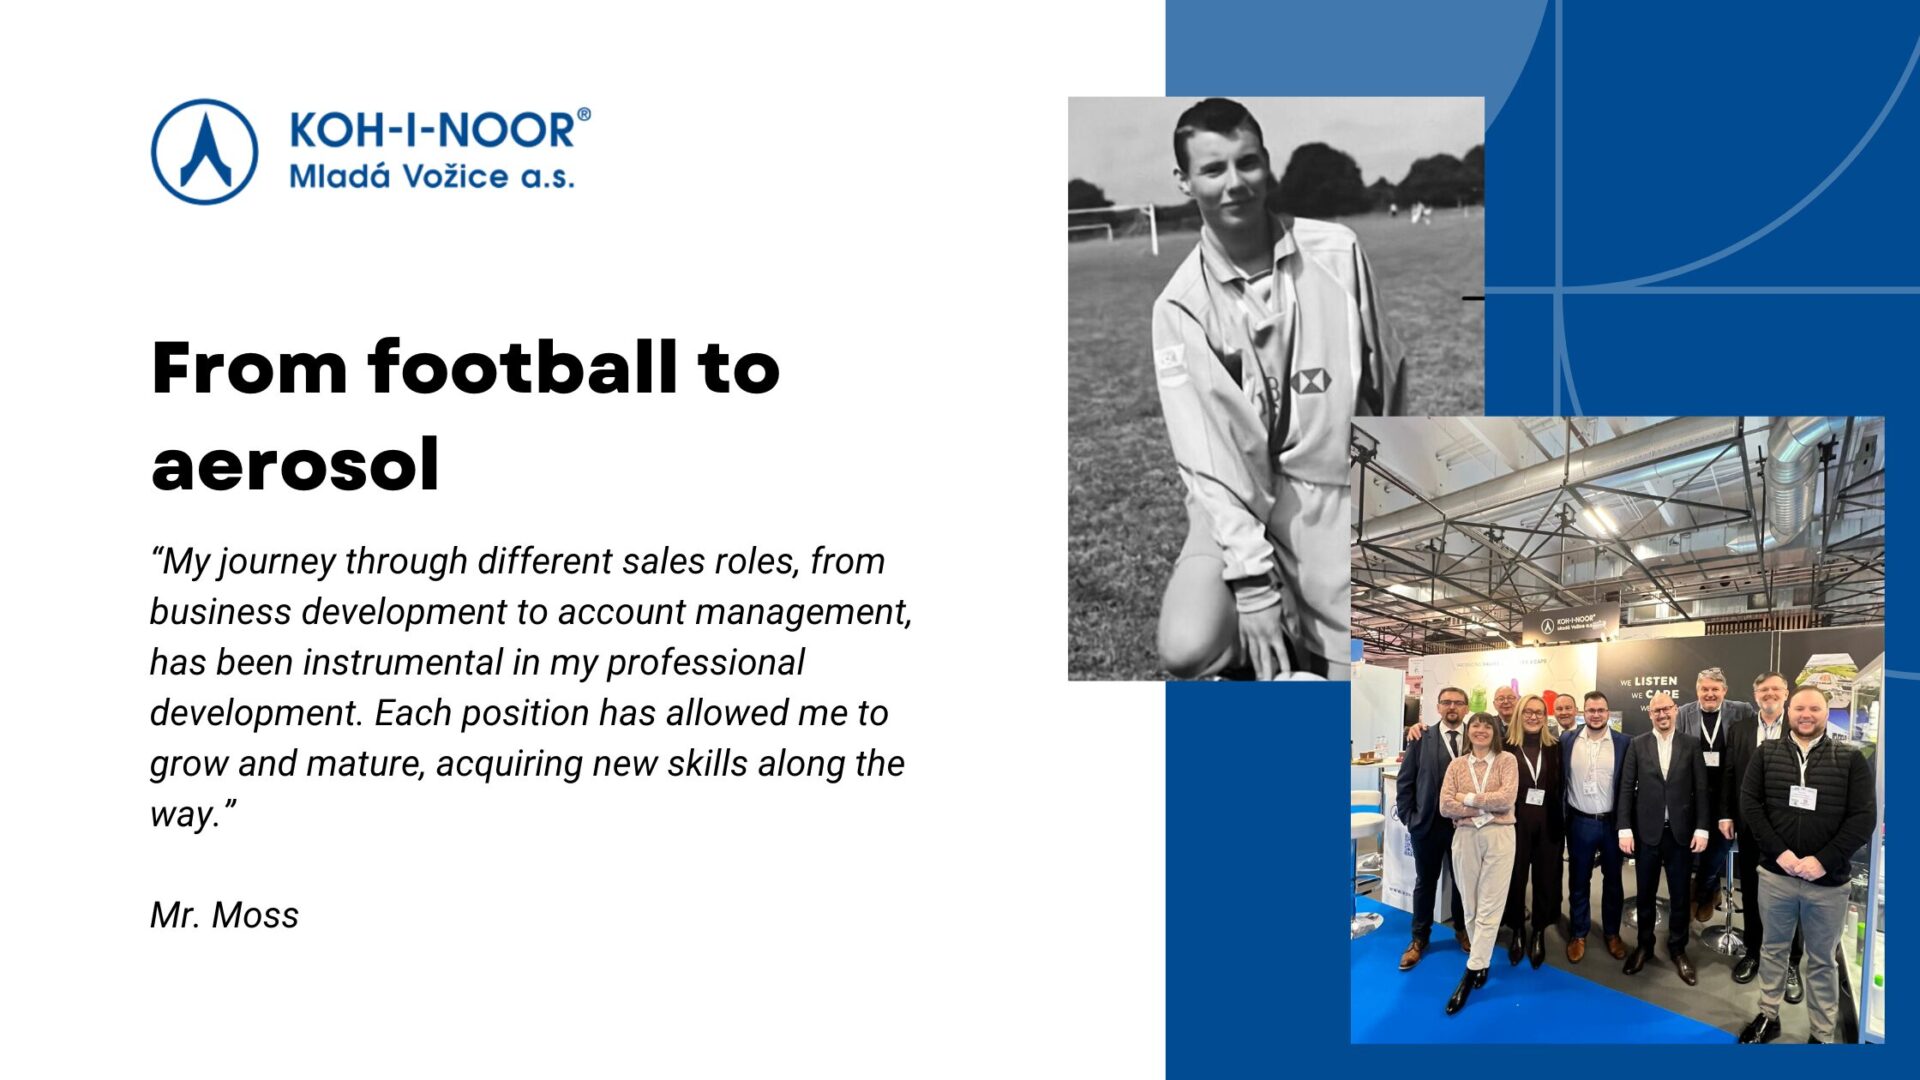 Interview with Mr. Moss: From Global Sales Manager at Salvalco to strengthening our sales team at KOH-I-NOOR Mladá Vožice